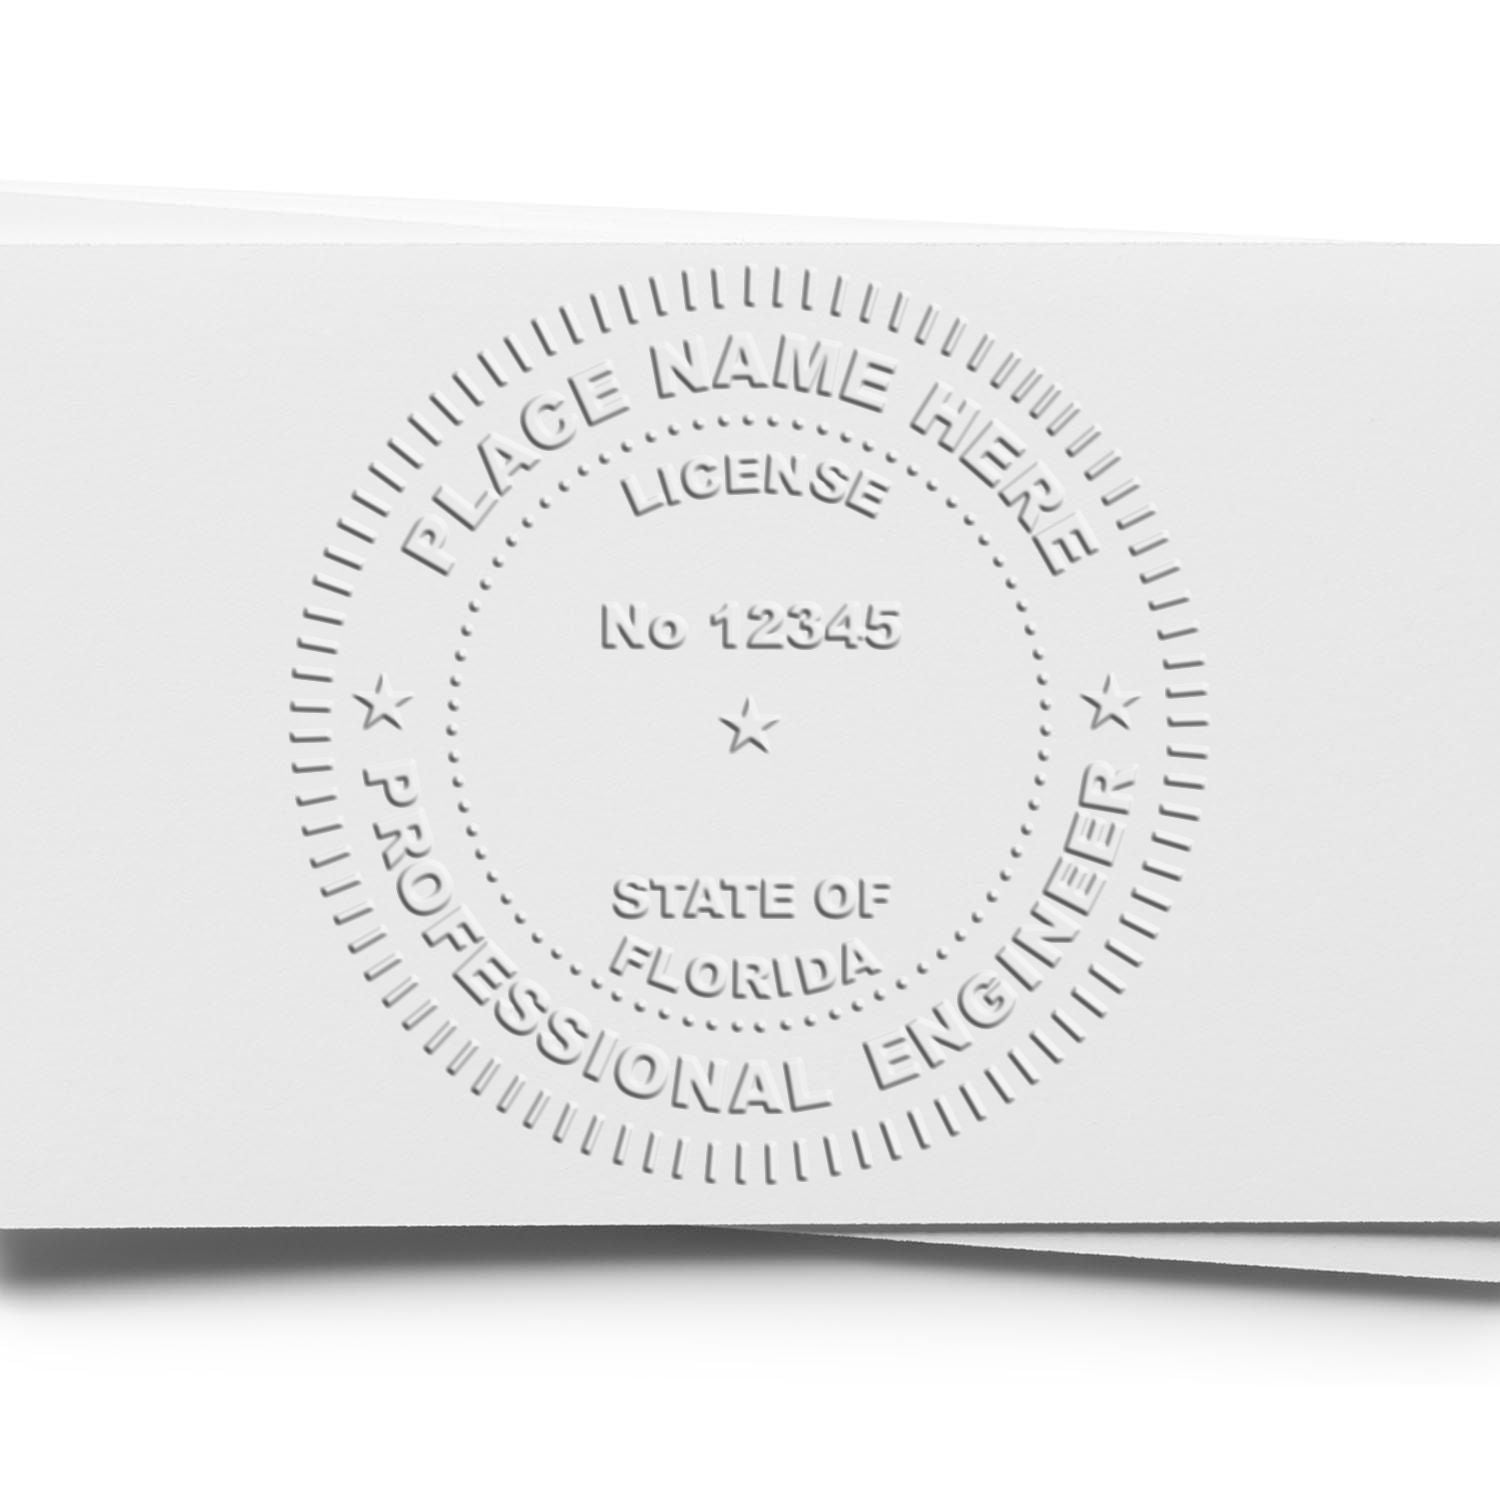 The Gift Florida Engineer Seal stamp impression comes to life with a crisp, detailed image stamped on paper - showcasing true professional quality.